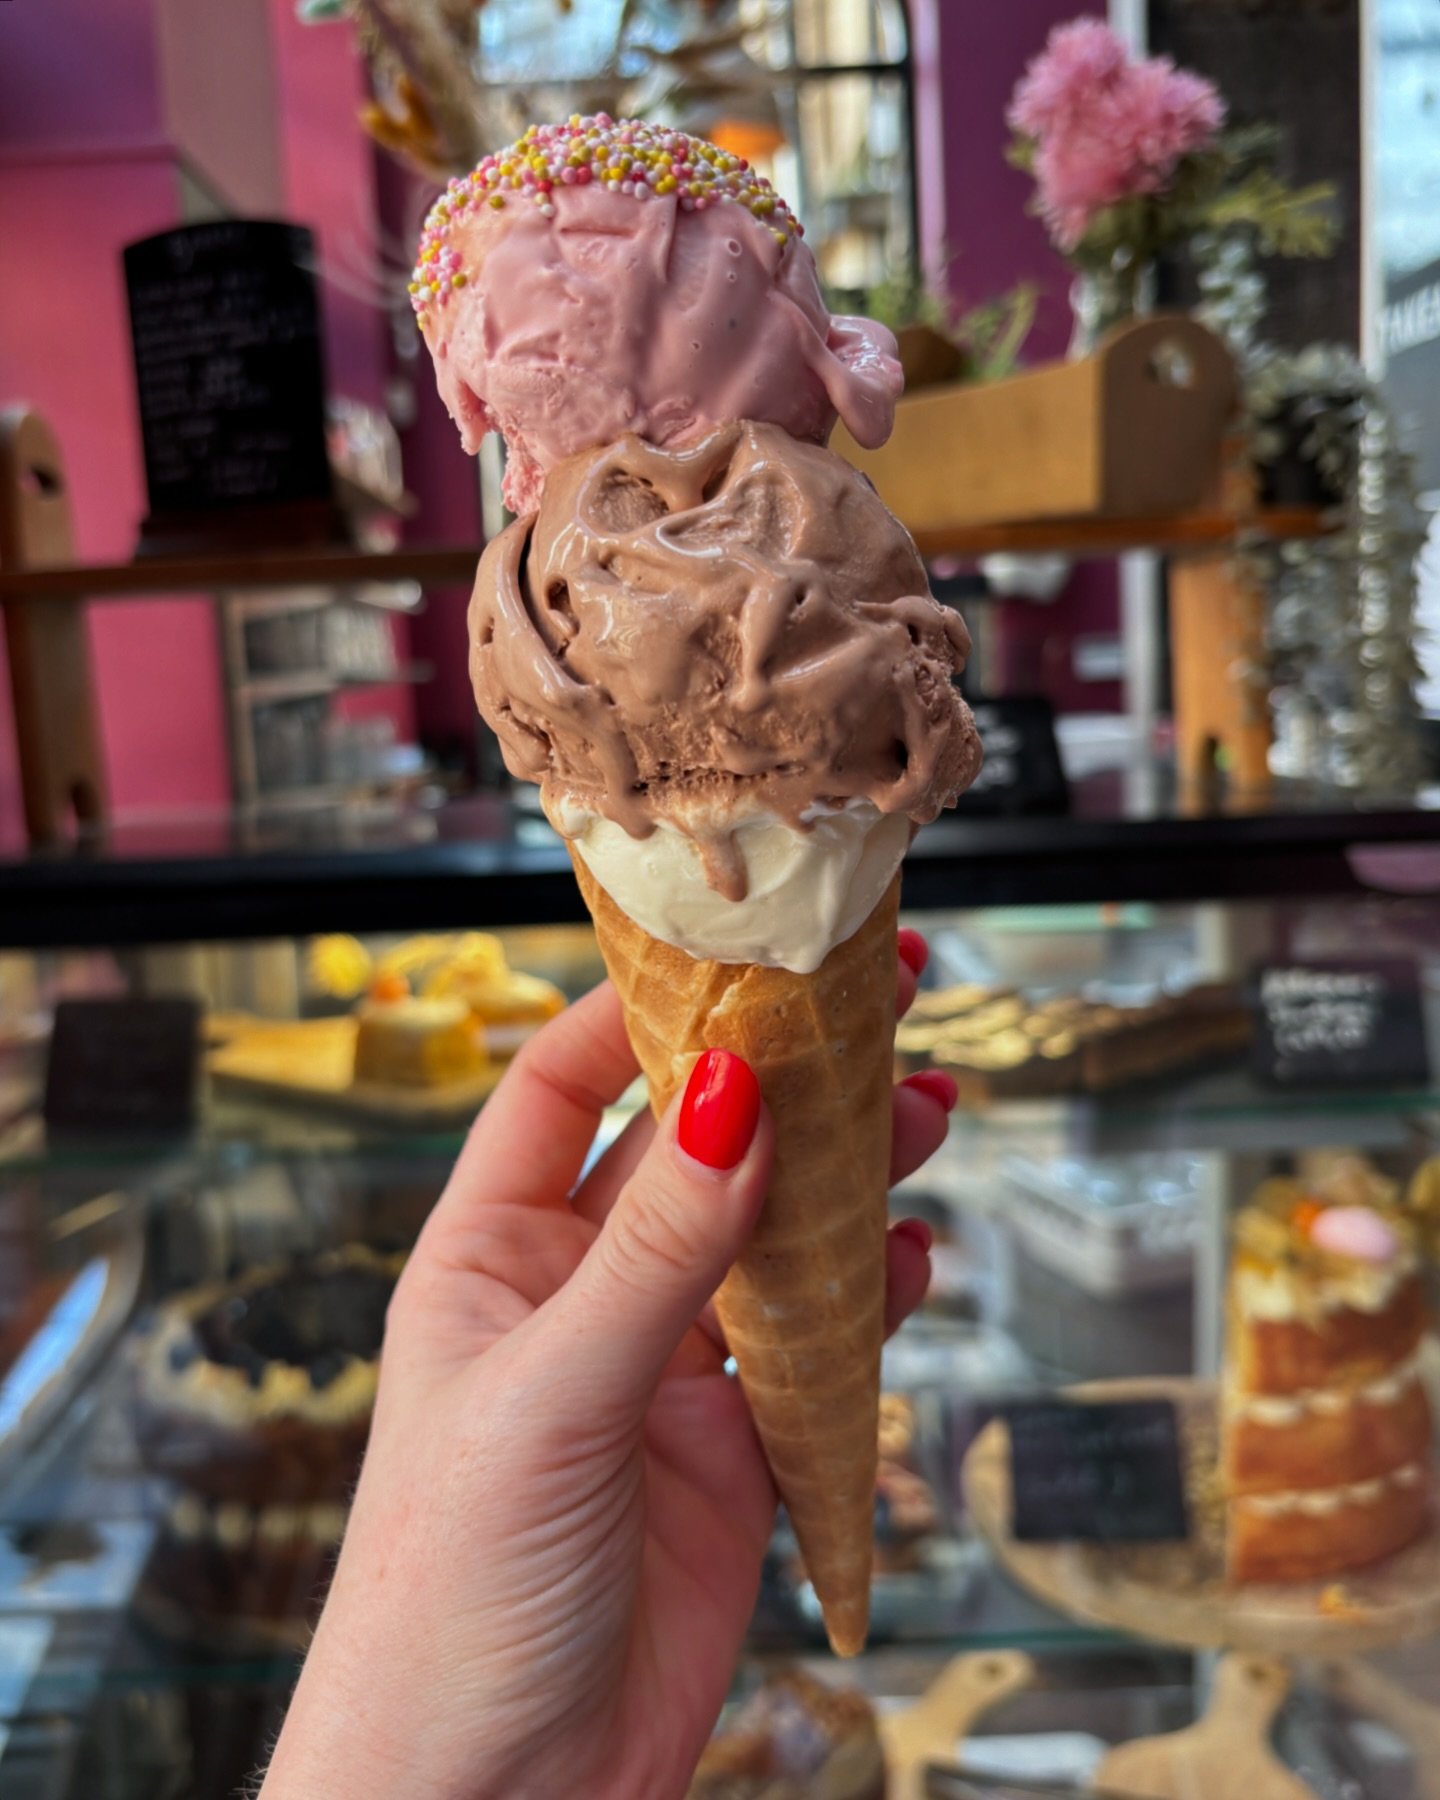 Only one way to keep cool in this weather 🥵🍦 (ice cream duuhh!) Available every day to sit in or takeaway.

#brunch #brunchglasgow #glasgowfood #glasgowcafe #glasgowbakery #singlend #breakfast #breakfastglasgow #visitglasgow #visitscotland #bakery 